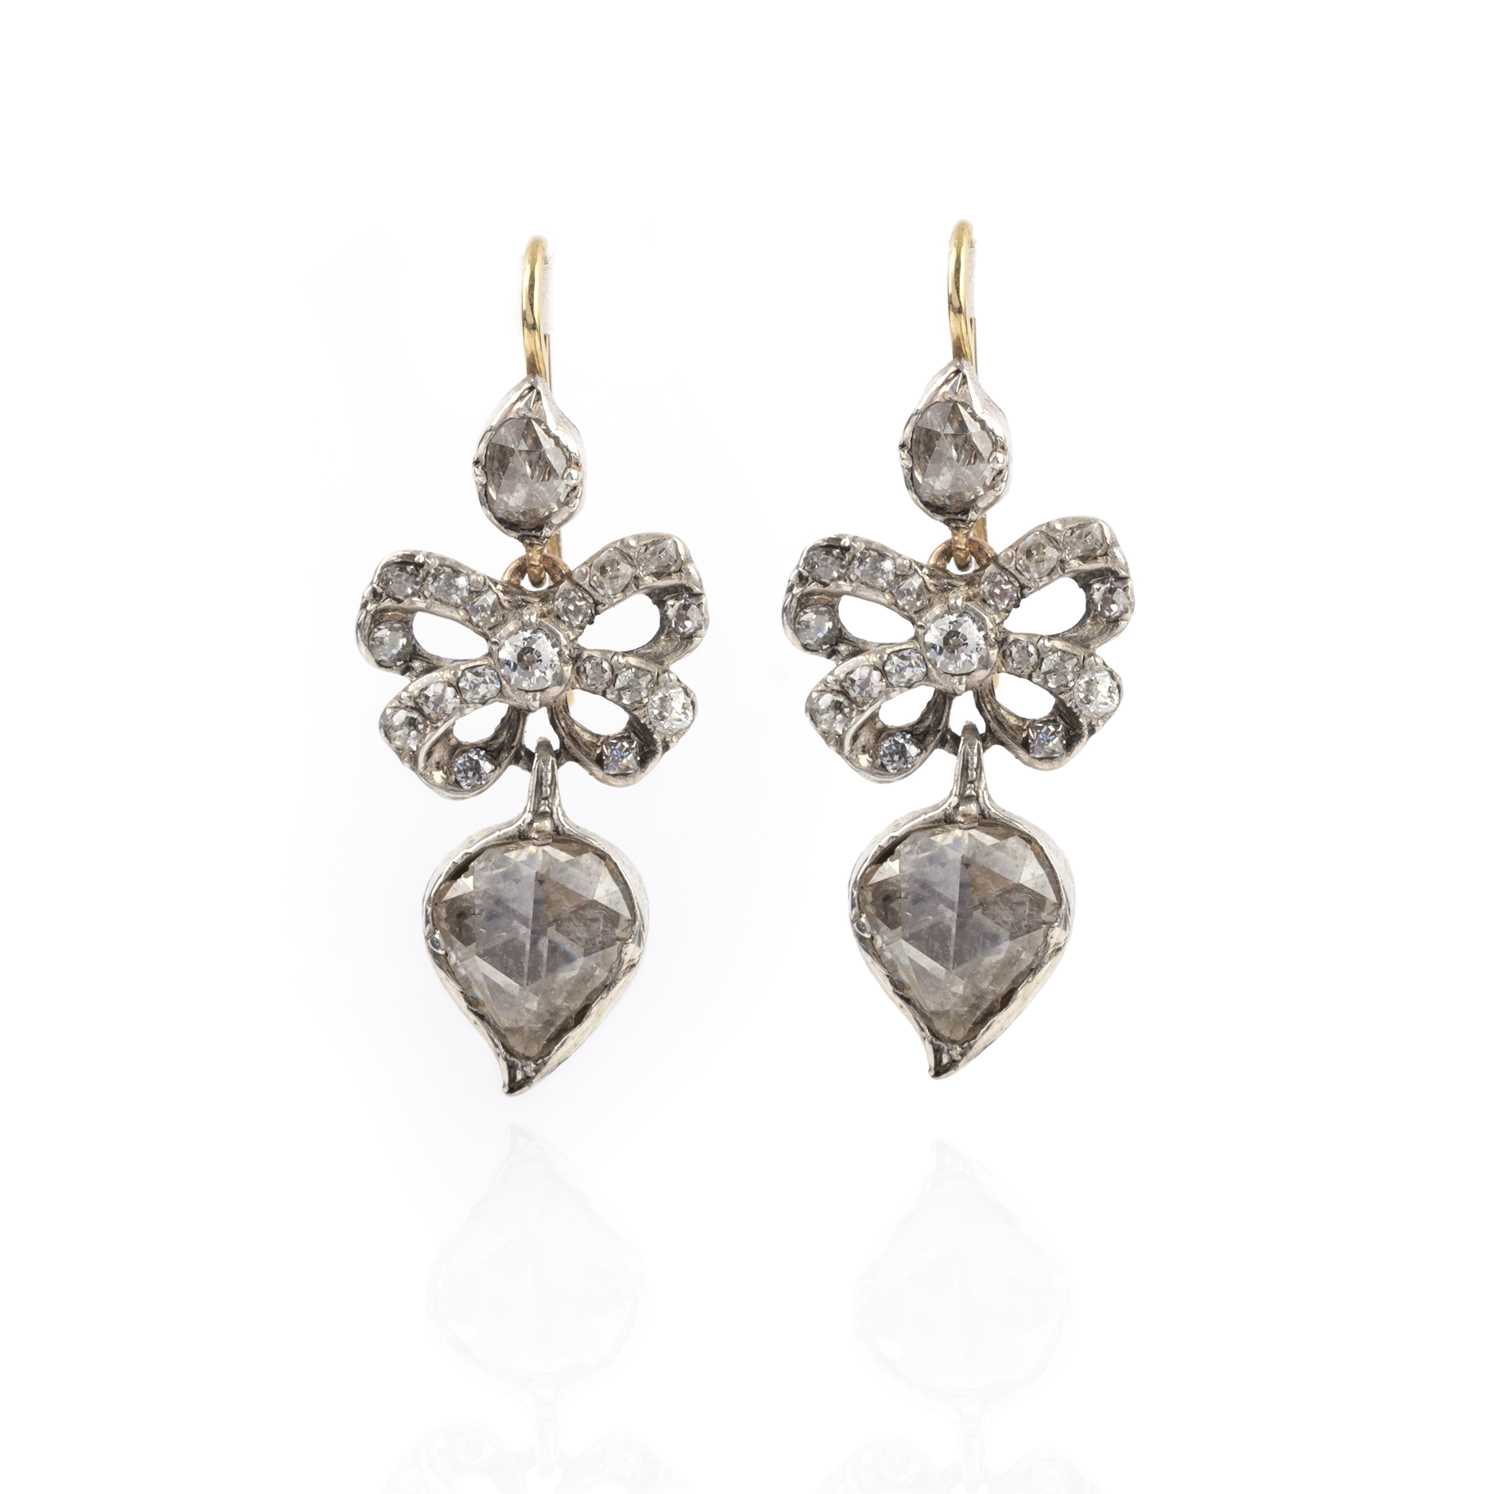 A pair of diamond drop earrings, set with rose-cut diamonds suspending diamond-set bows and a larger